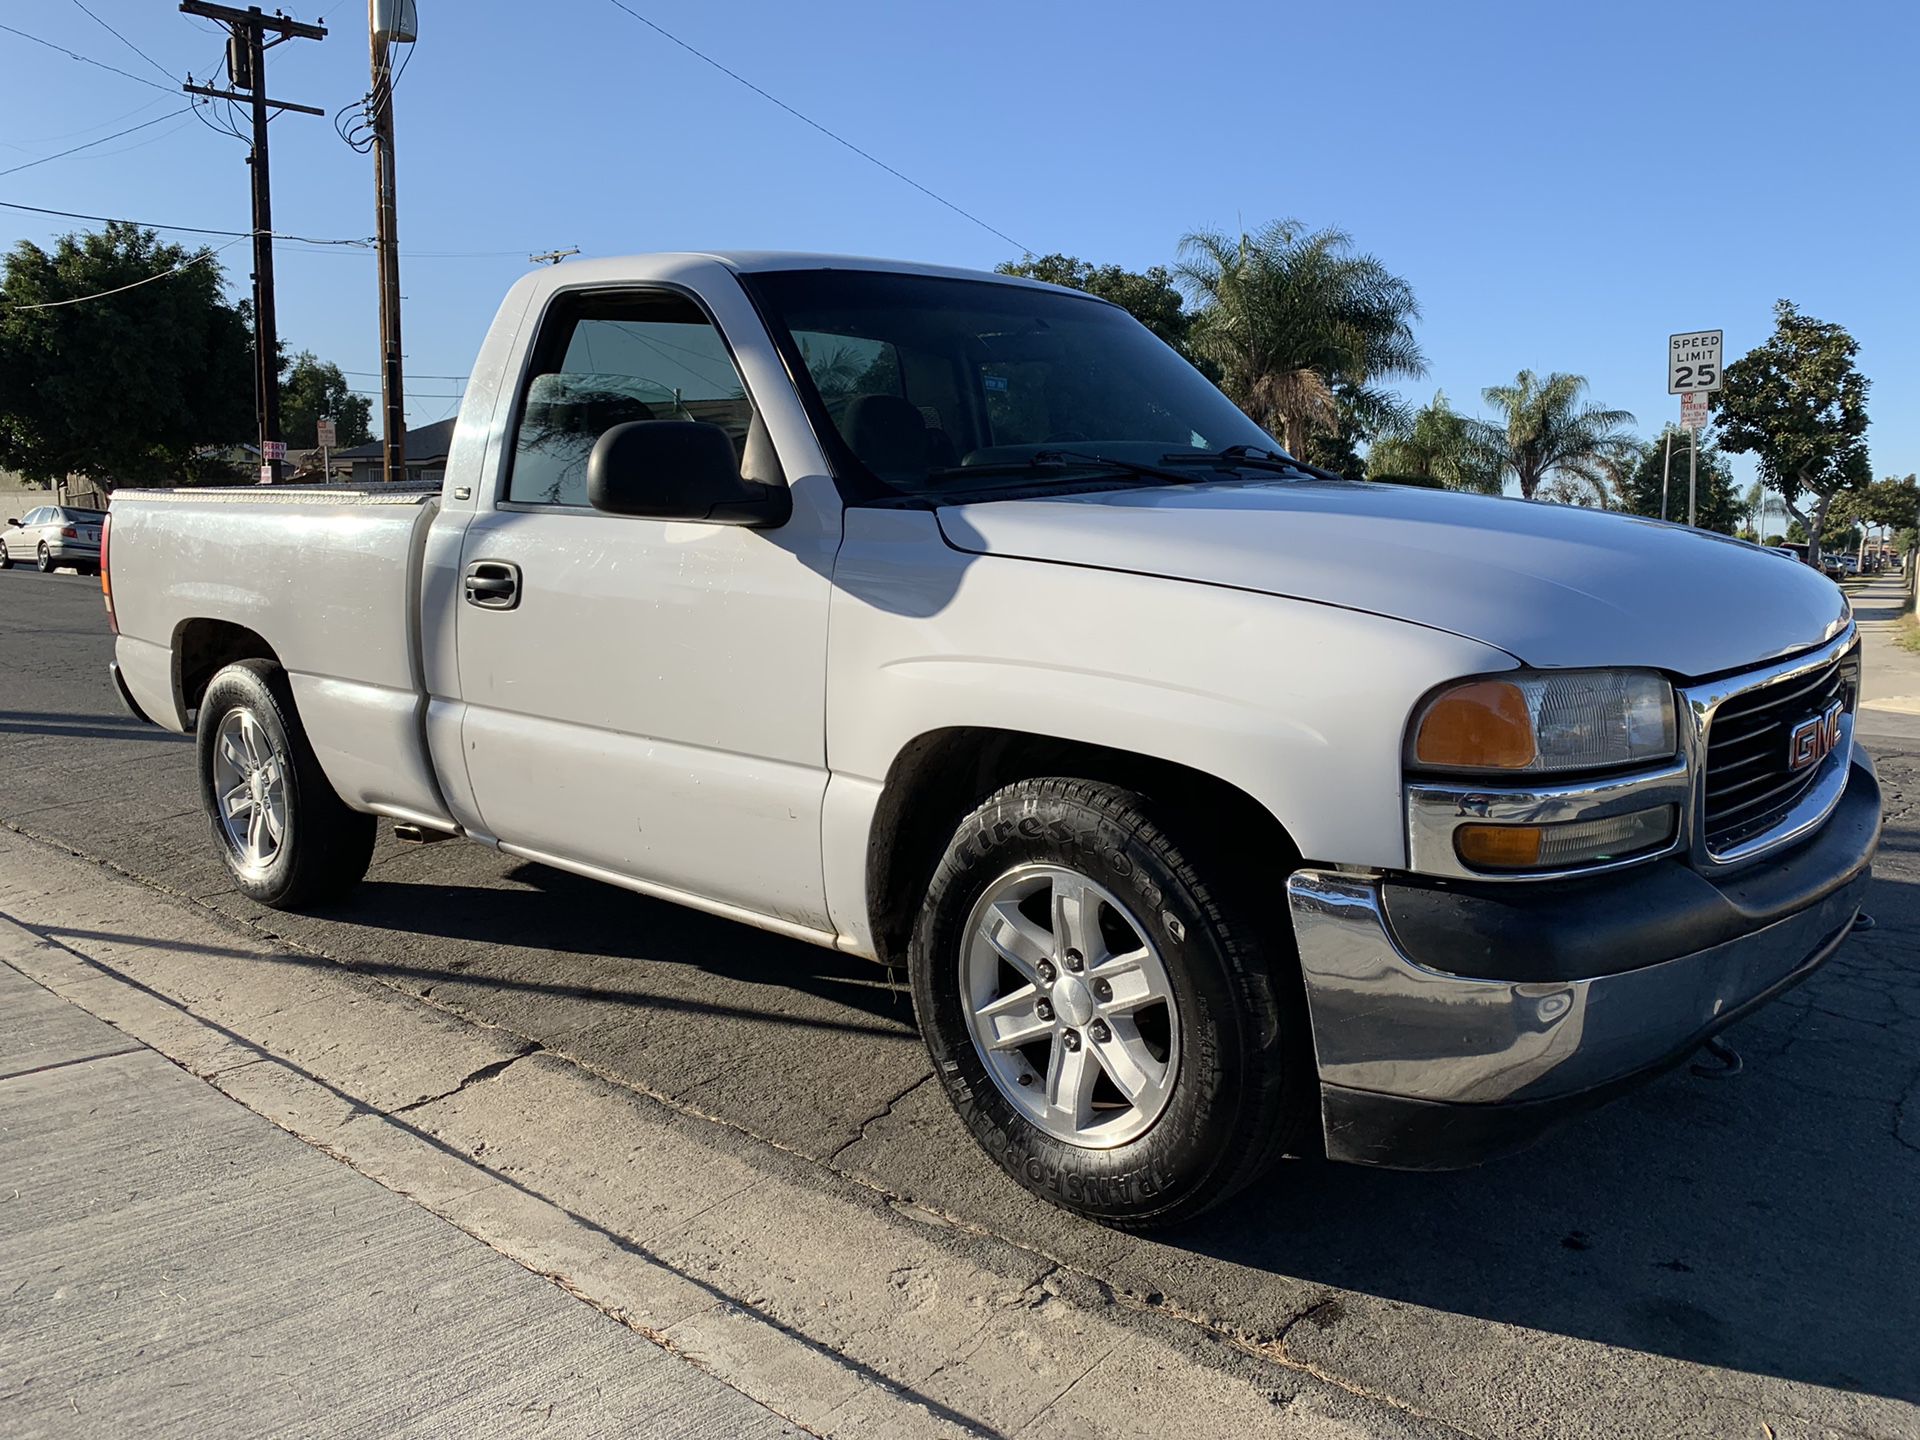 2000 GMC Sierra not for parts